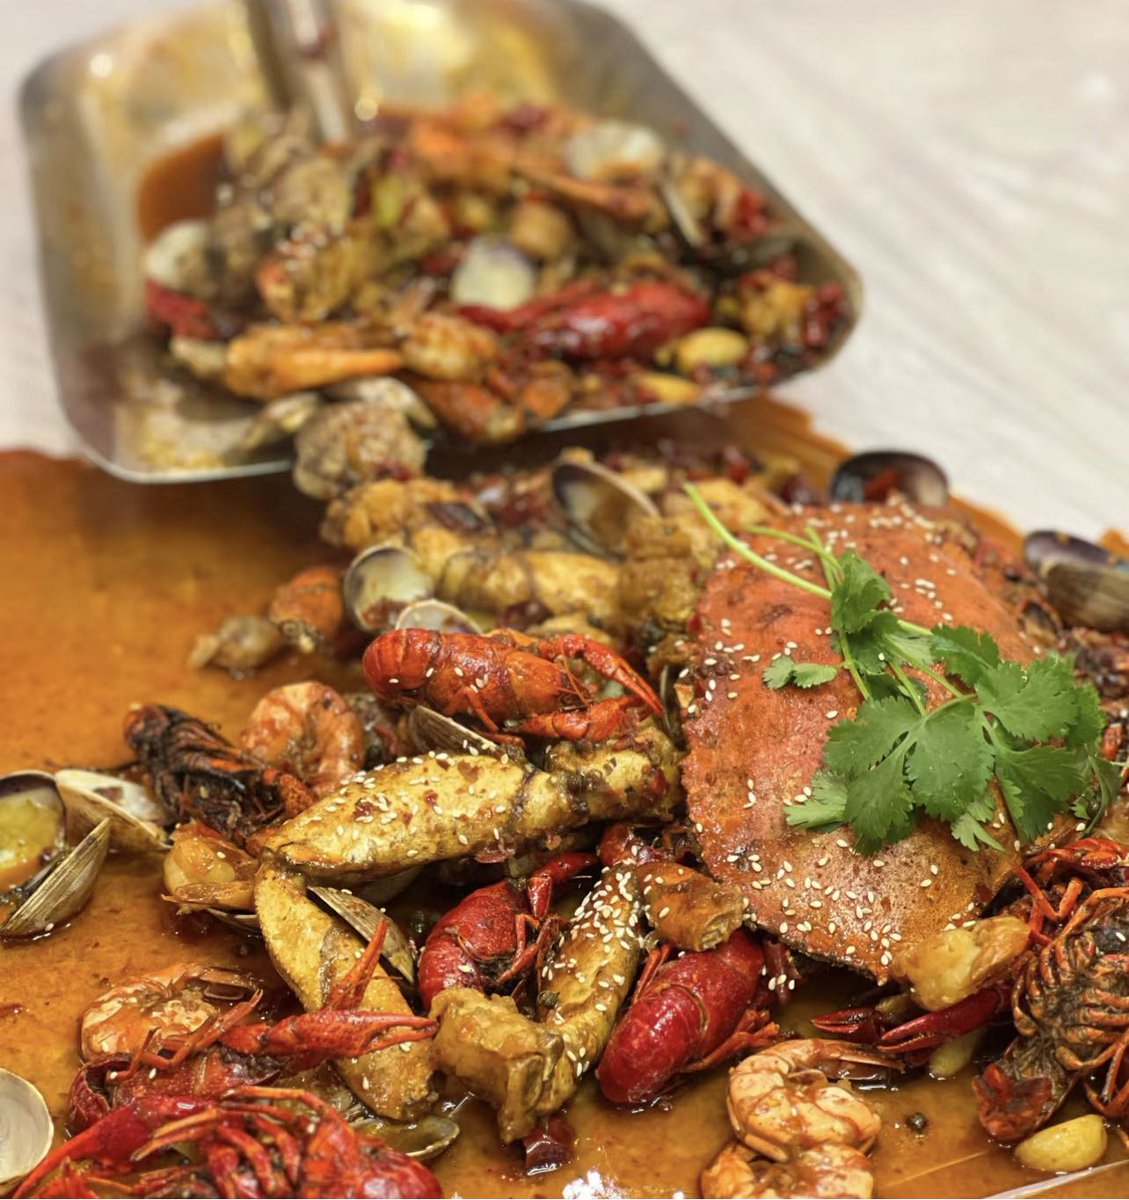 Introducing our TWX Captain Boil Seafood Experience (Cajun seafood boil)! 🔥 Get ready to dive into a feast of epic proportions at TWX Chinese & Thai Cuisine! #CaptainsBoil  #RichmondBC   #RichmondFood #VancouverFood #RichmondEAT #VancouverEAT #yvrfoodie #vancouverfoodie